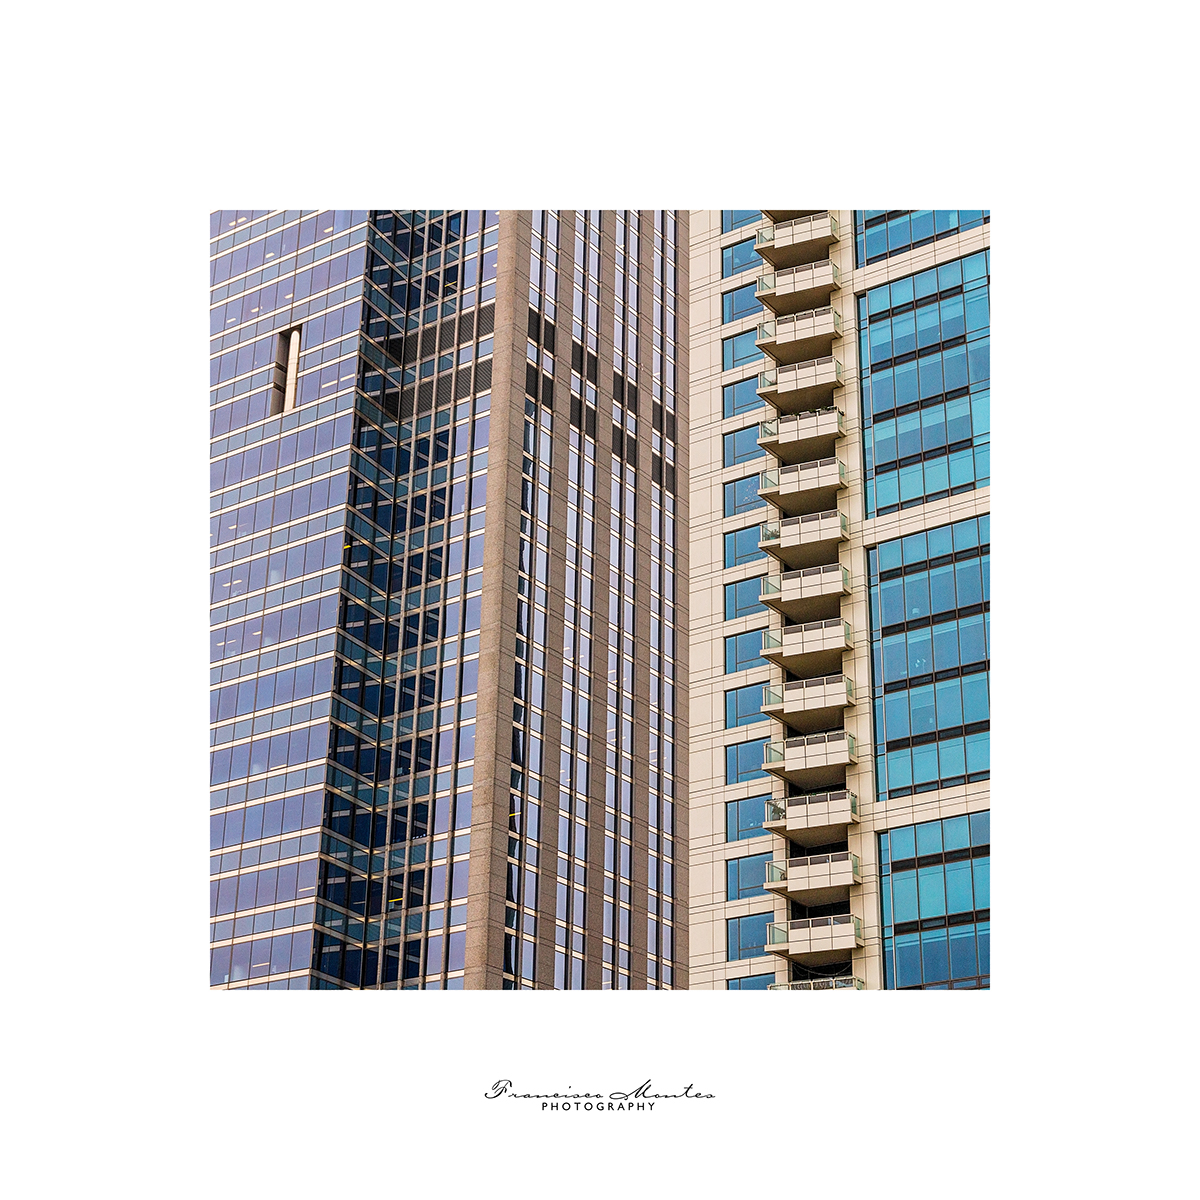 architecture chicago buildings Francisco Montes Photography Urban city modern